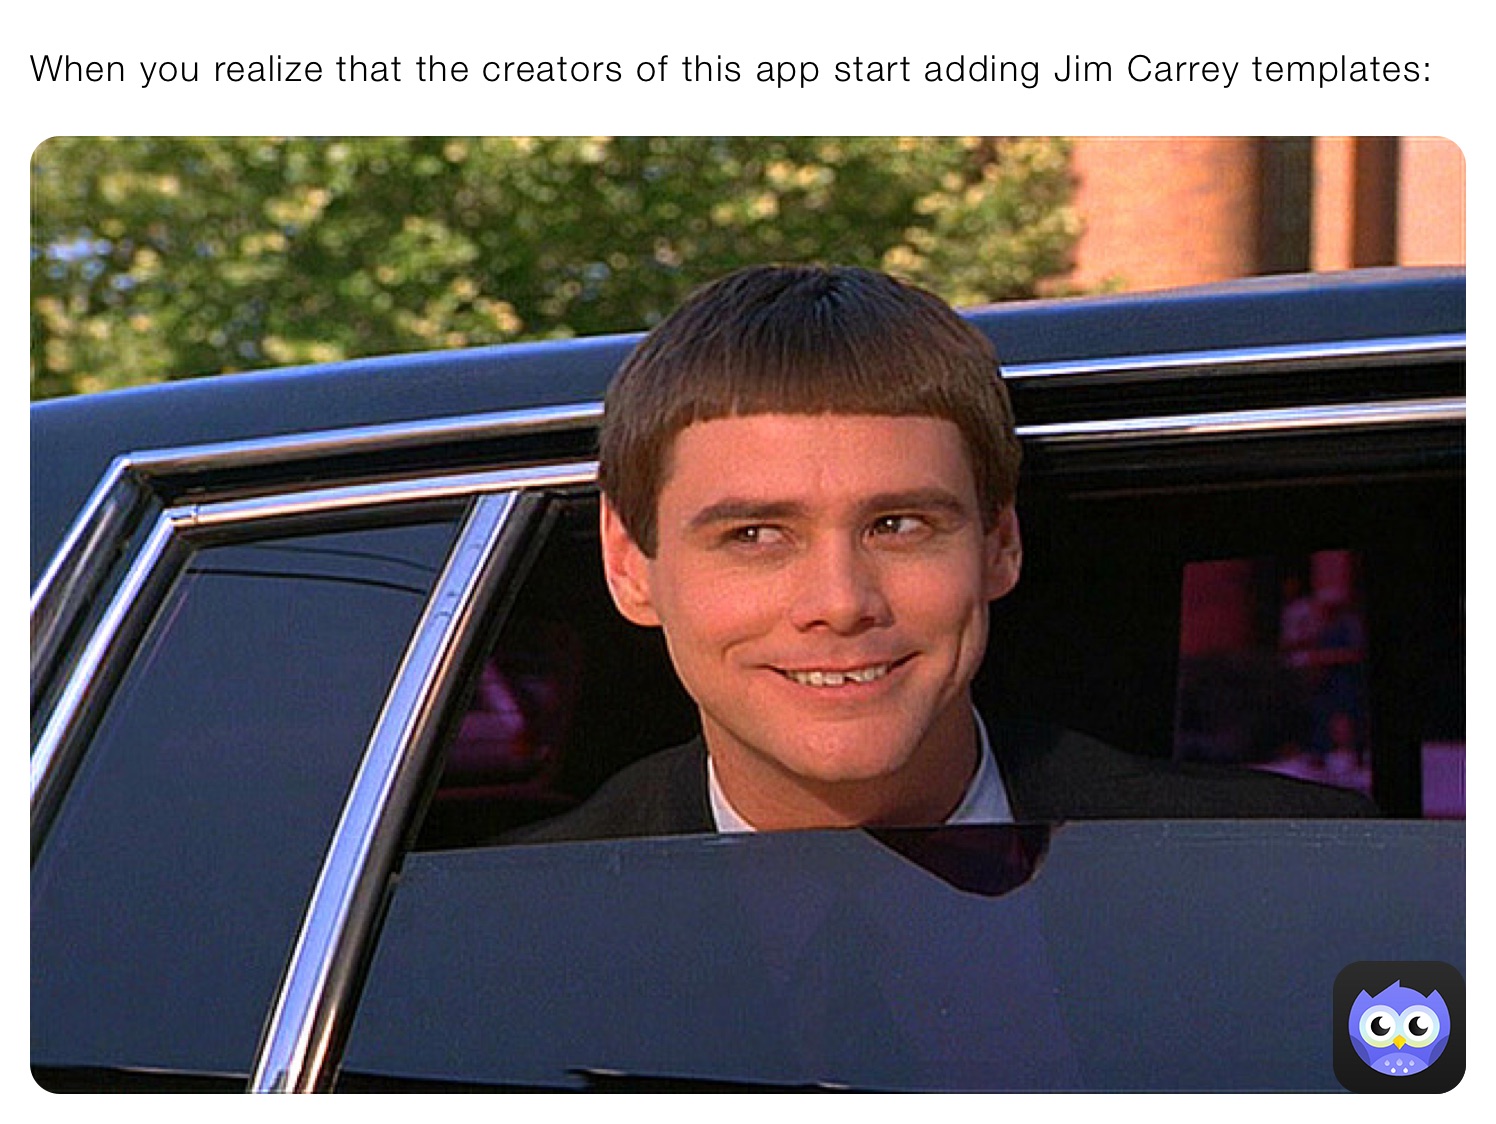 When you realize that the creators of this app start adding Jim Carrey templates: